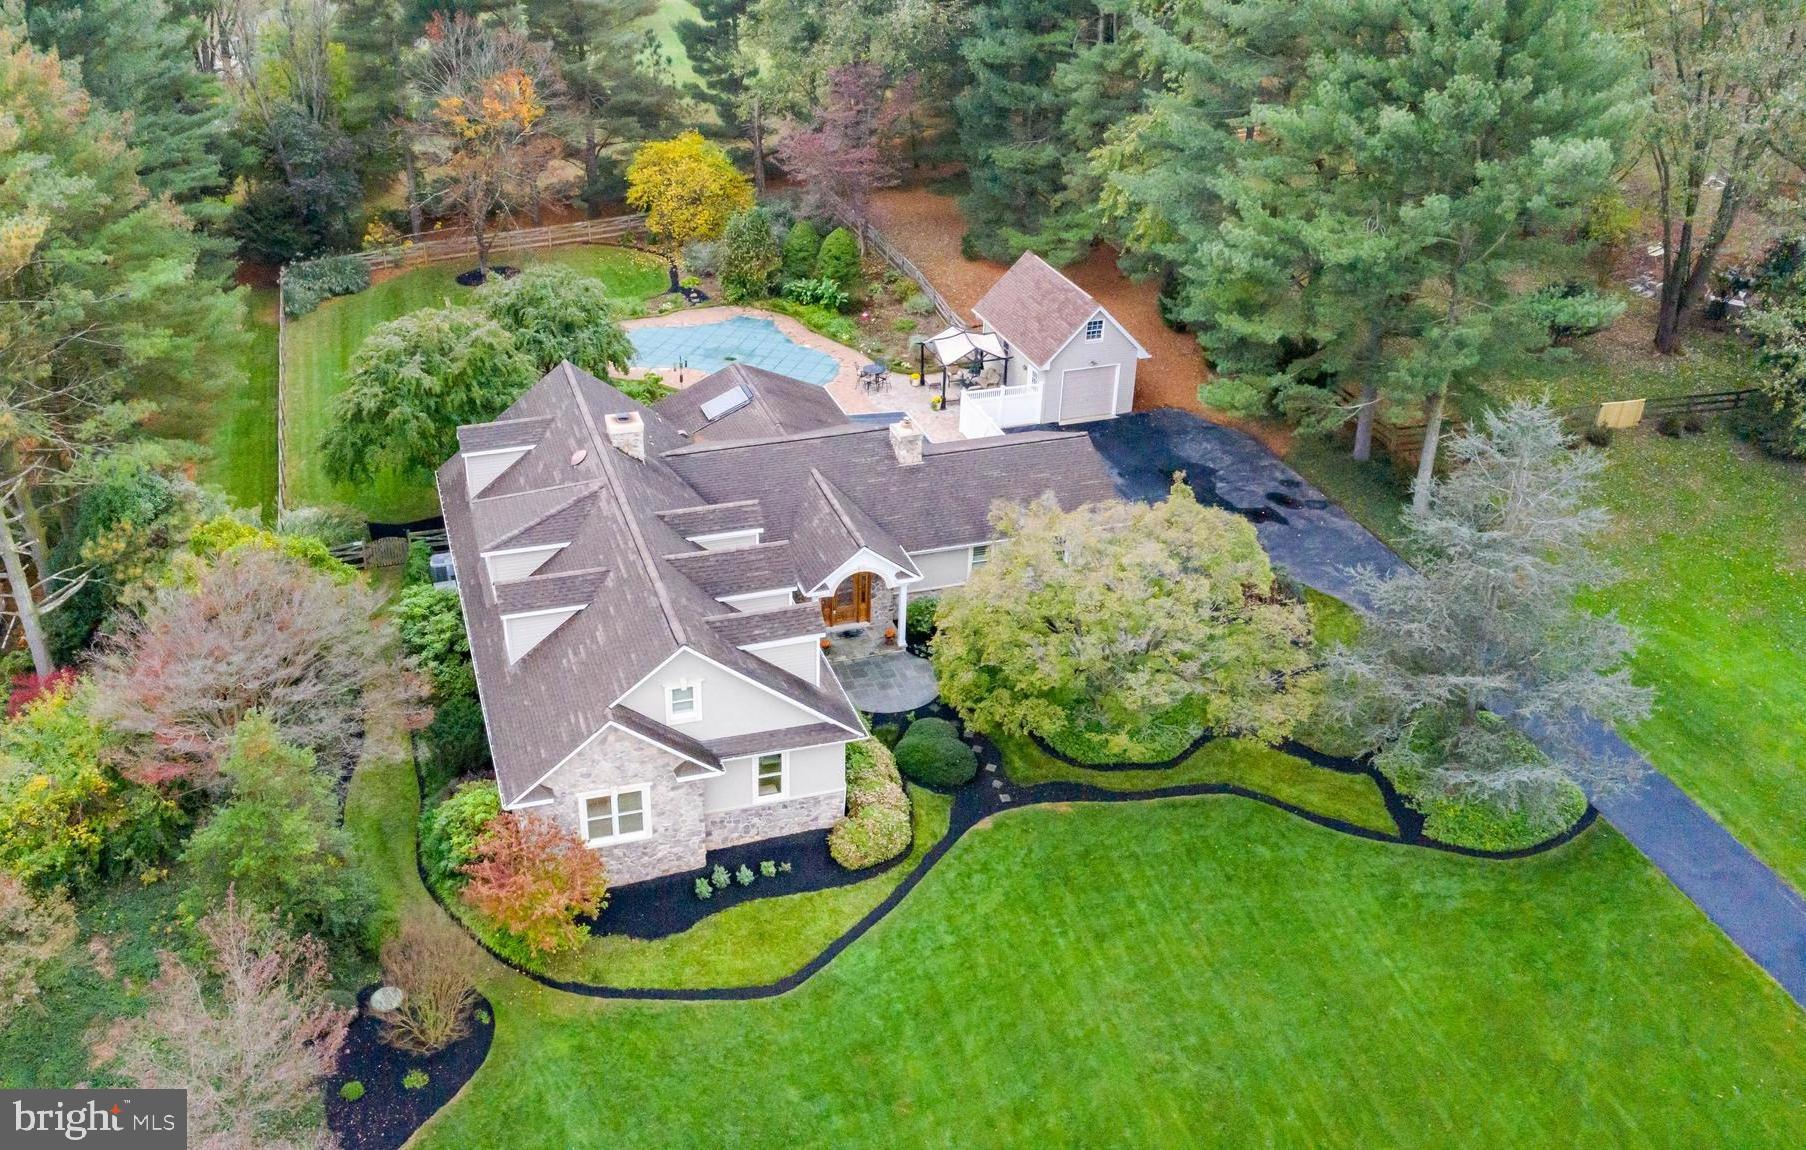 an aerial view of a house with a garden and lots of trees